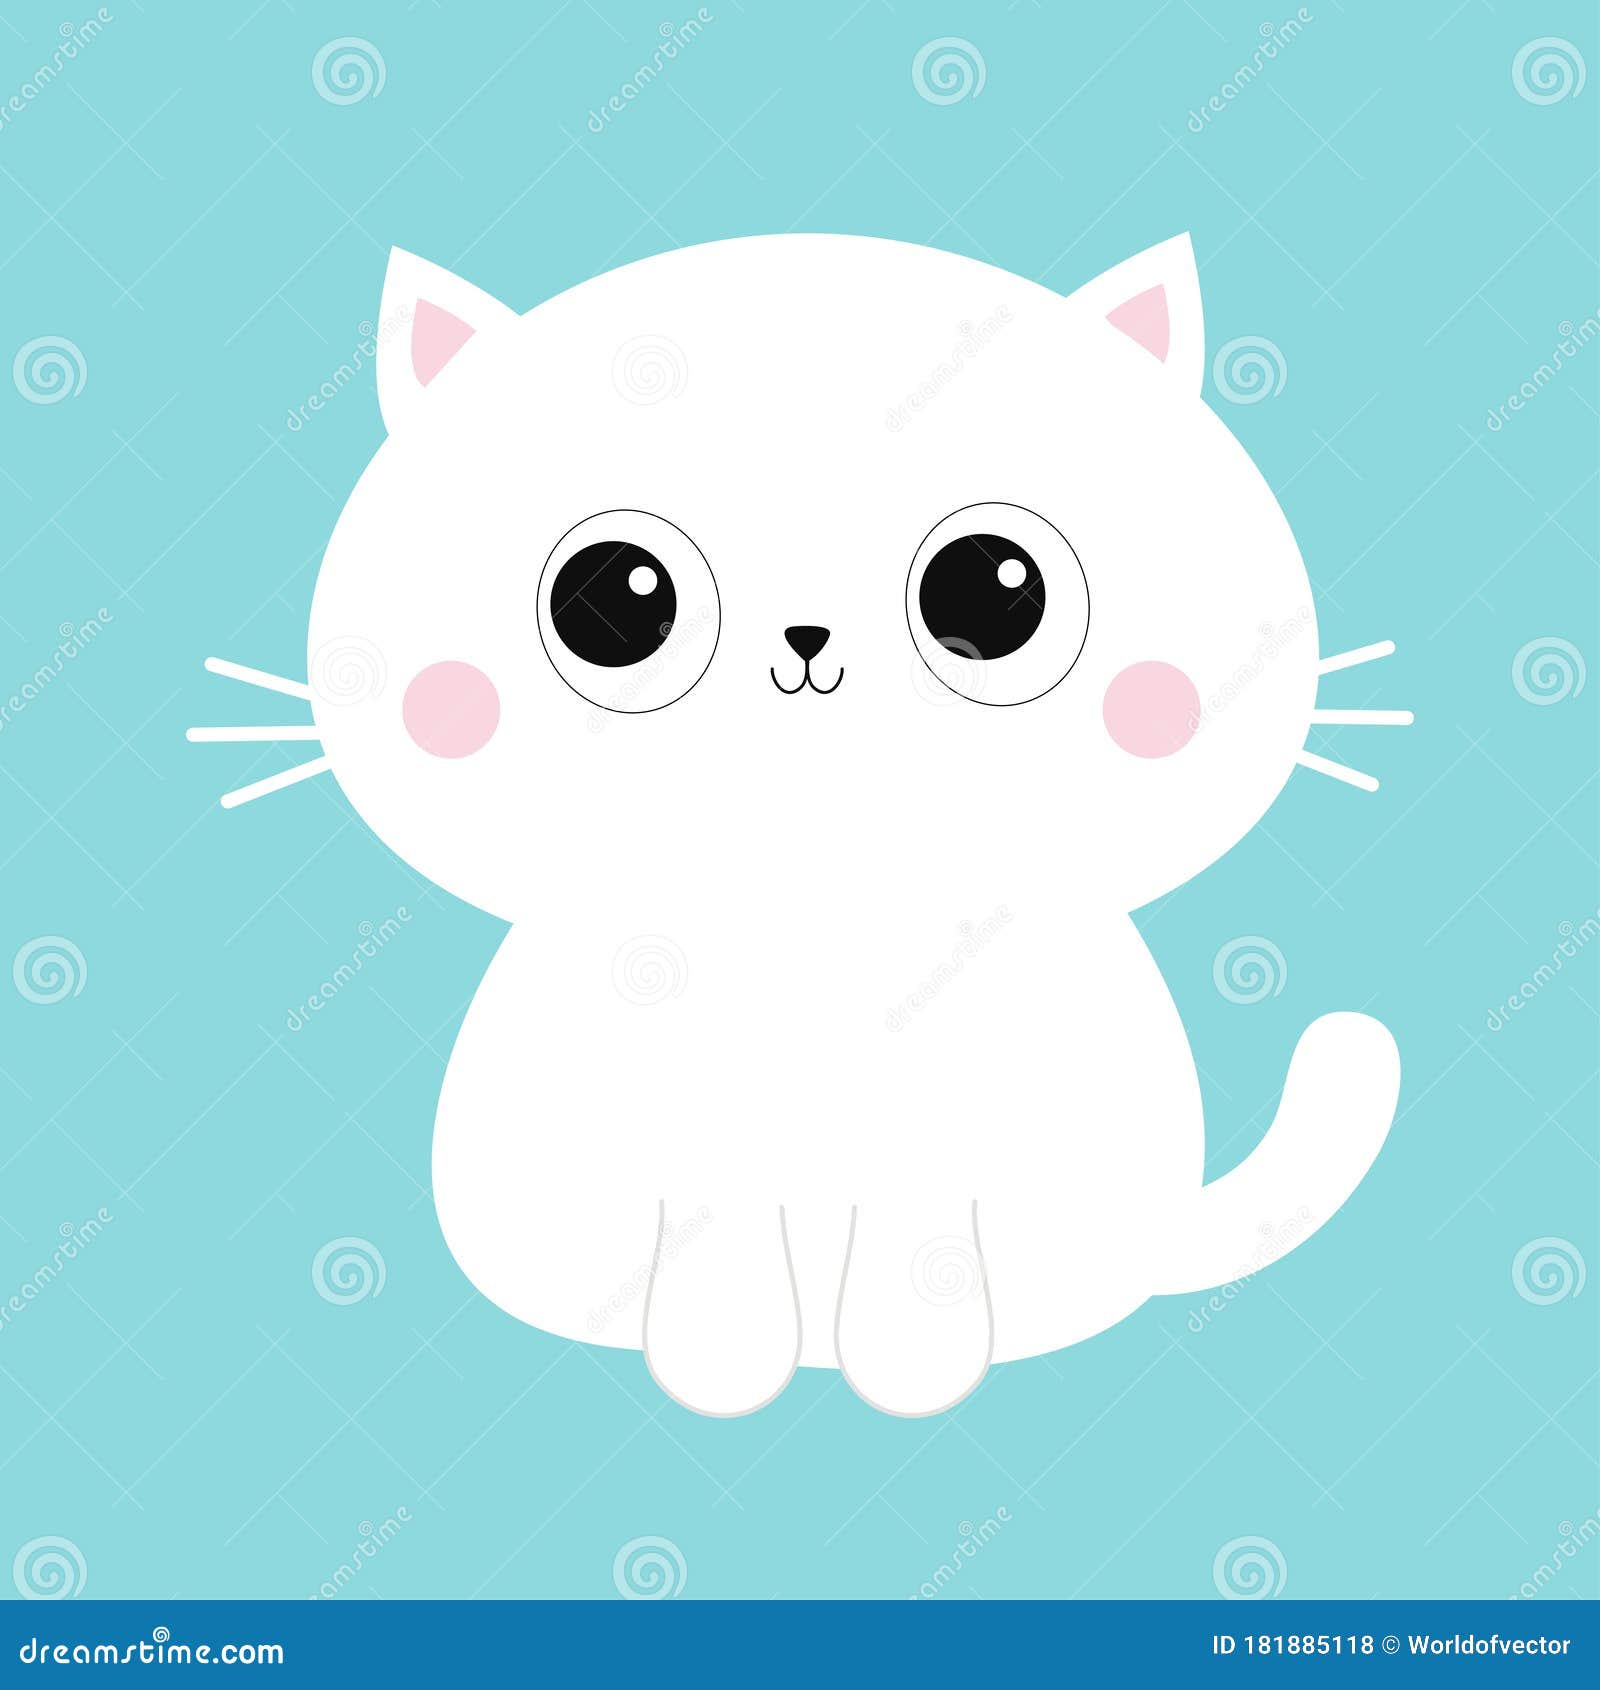 cat icon🌷  Baby cats, Cute cats and dogs, Cute baby cats